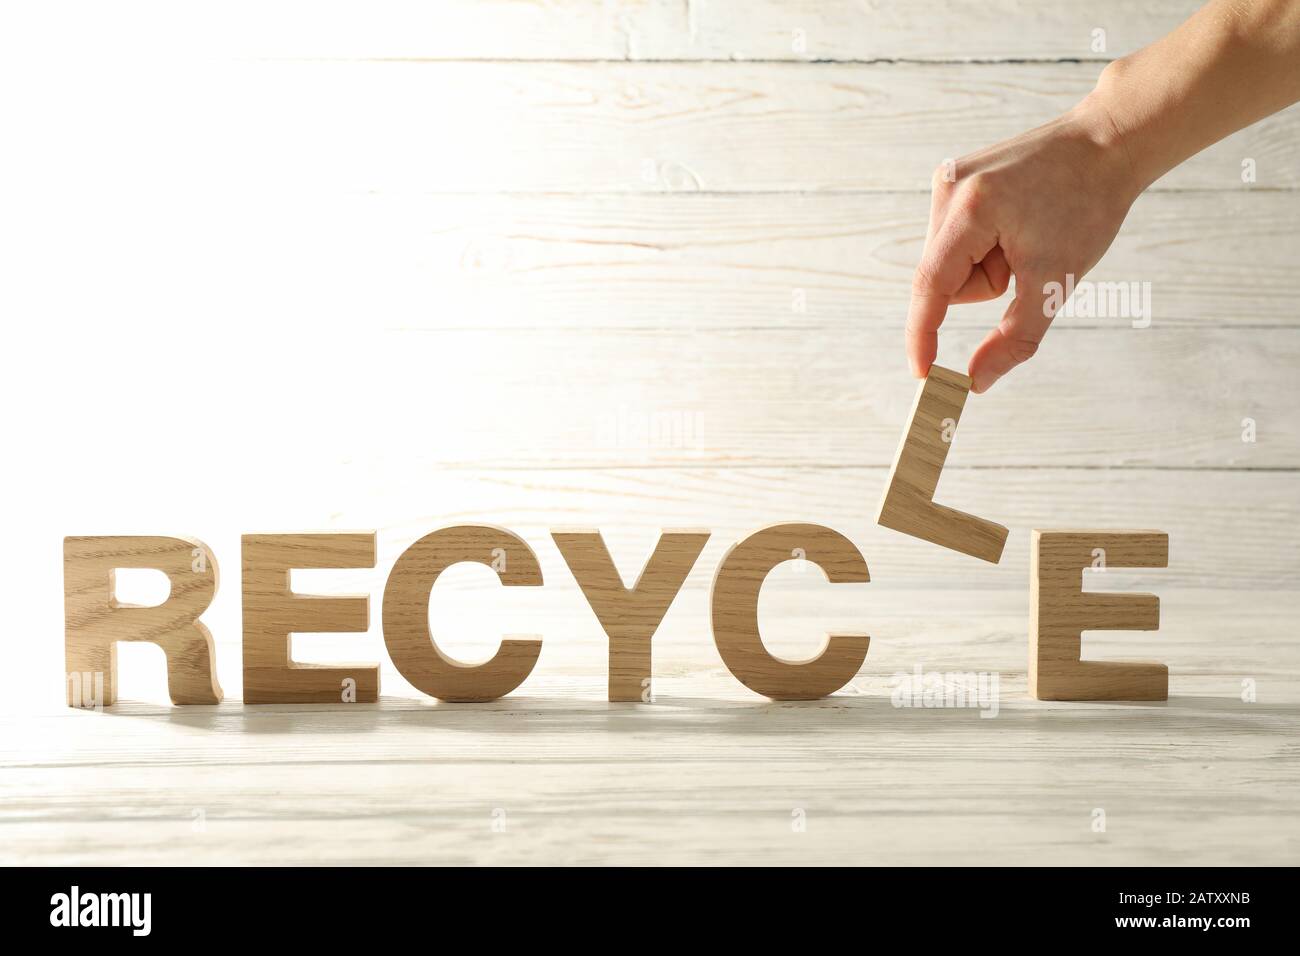 L Recycle Stock Photos L Recycle Stock Images Alamy